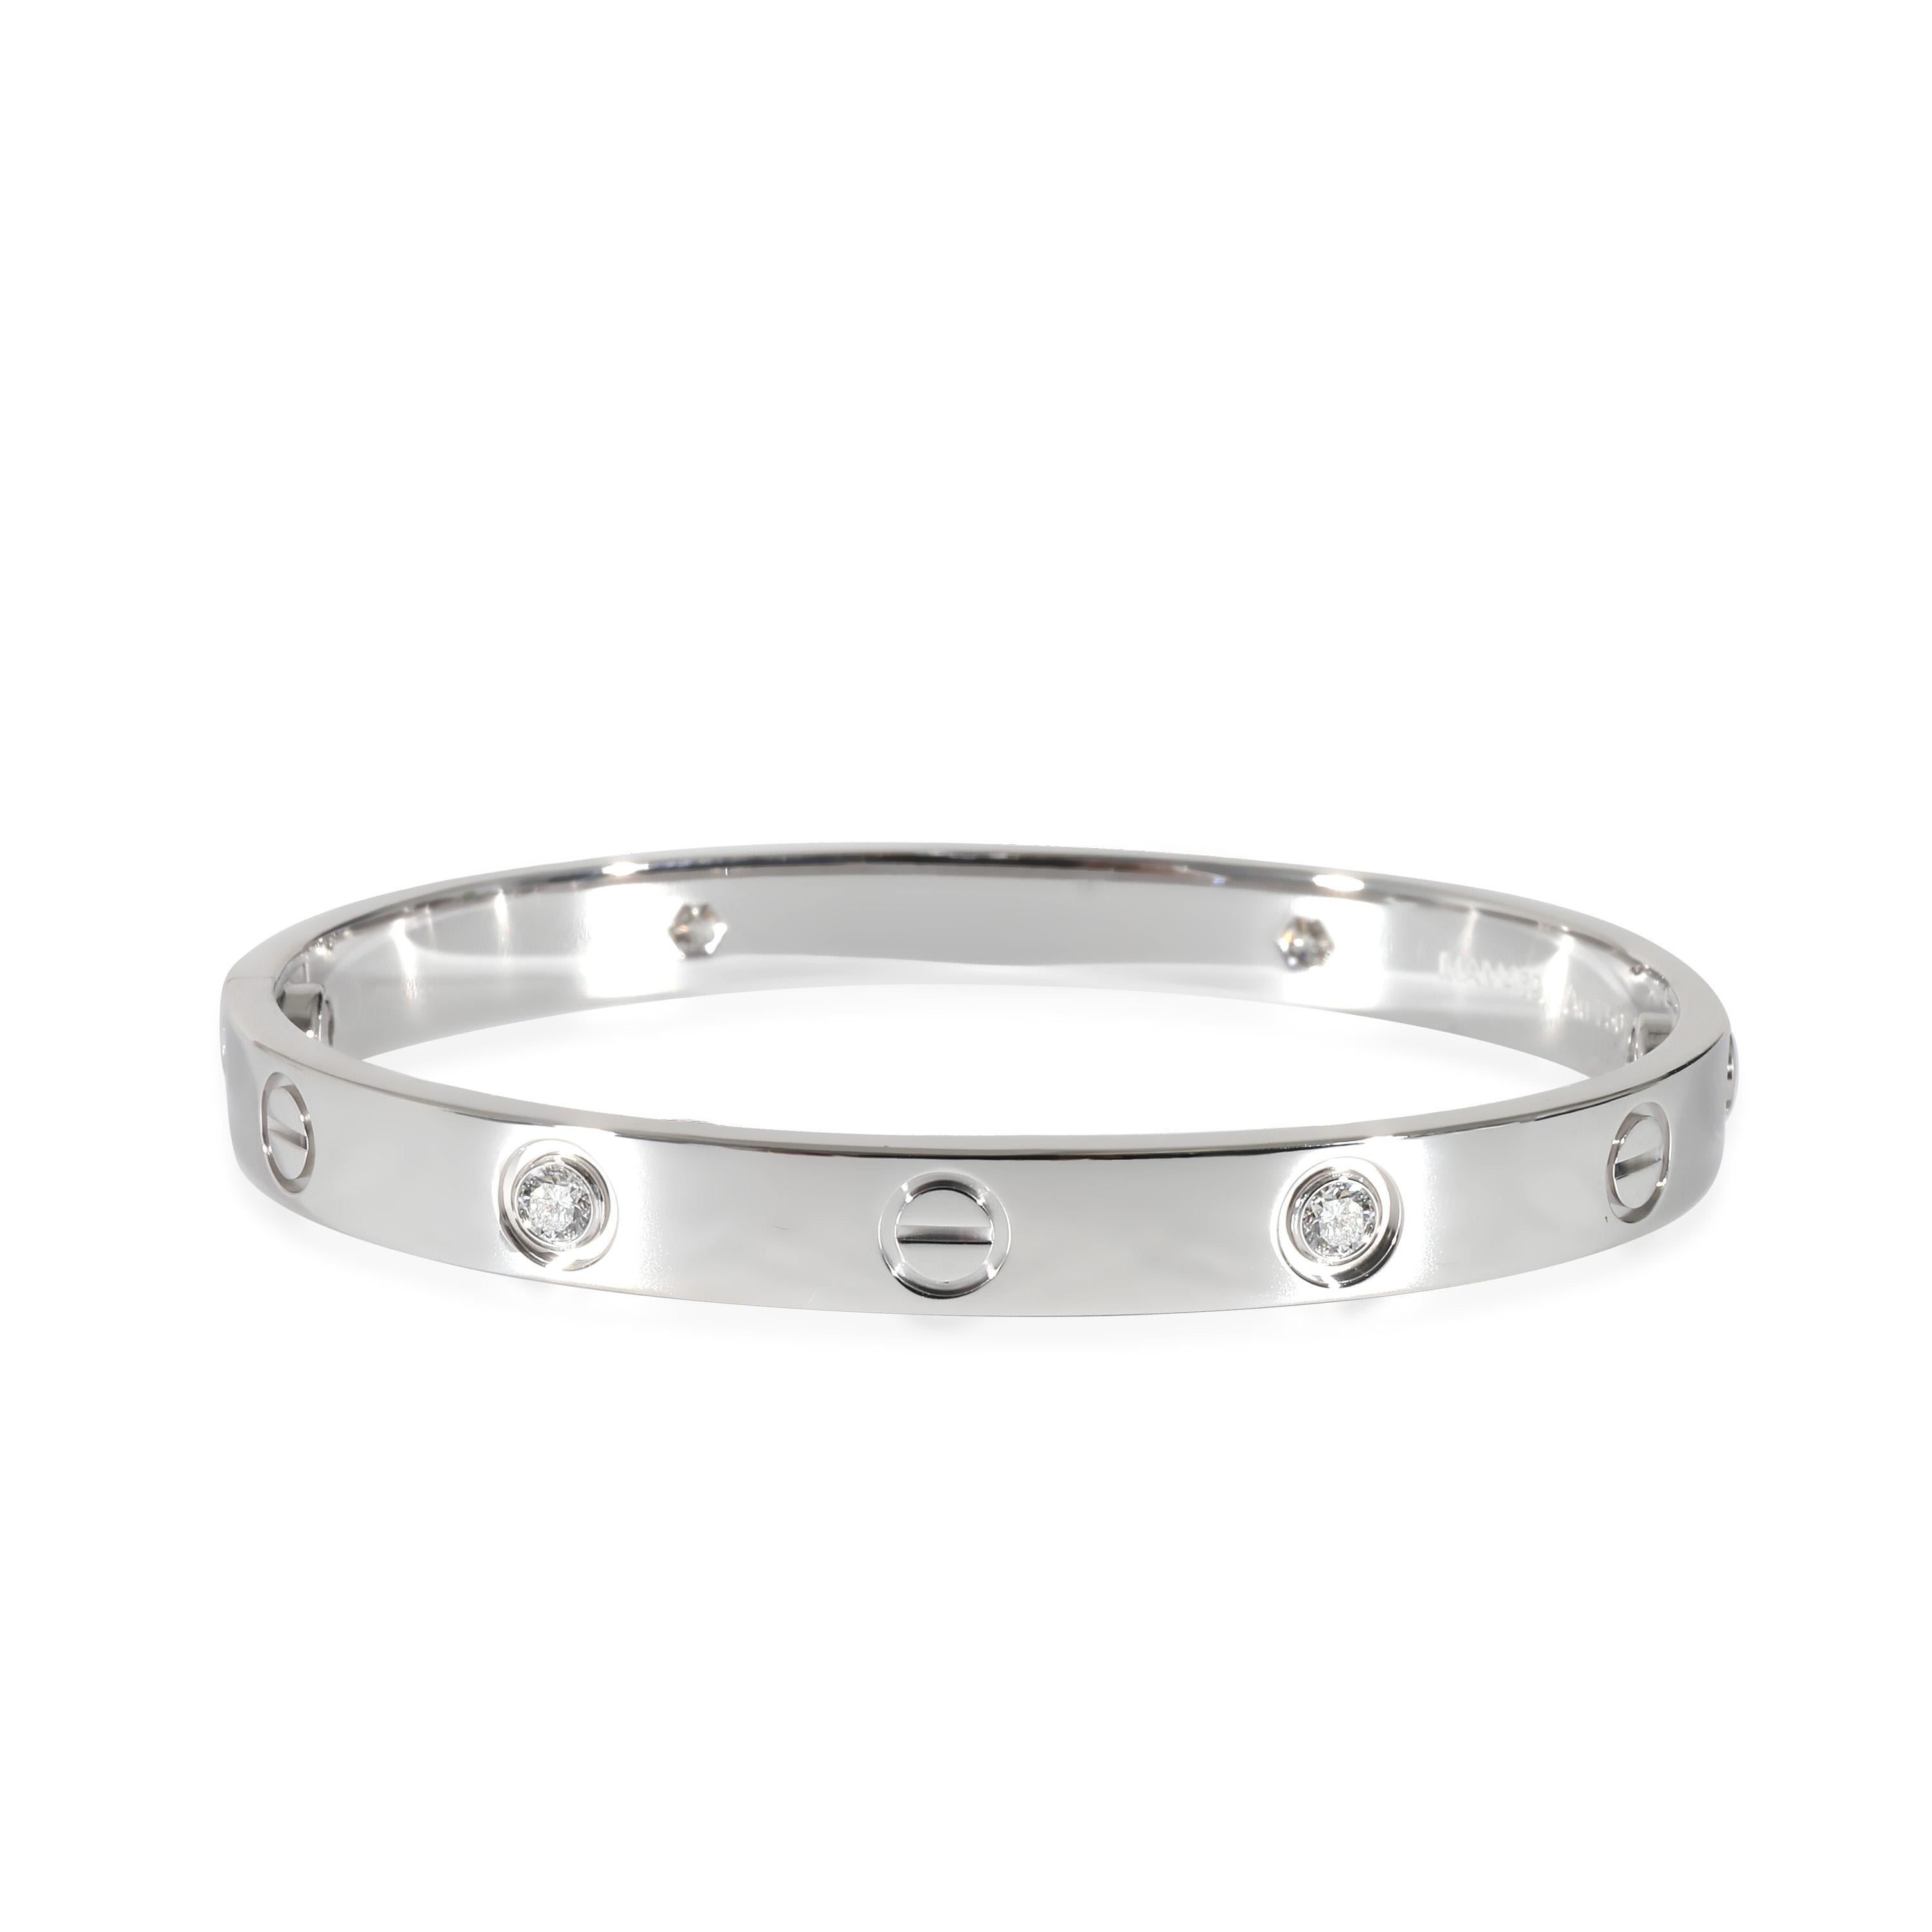 Cartier Love Bracelet in 18K White Gold 0.42 CTW

PRIMARY DETAILS
SKU: 134398
Listing Title: Cartier Love Bracelet in 18K White Gold 0.42 CTW
Condition Description: Cartier's Love collection is the epitome of iconic, from the recognizable designs to